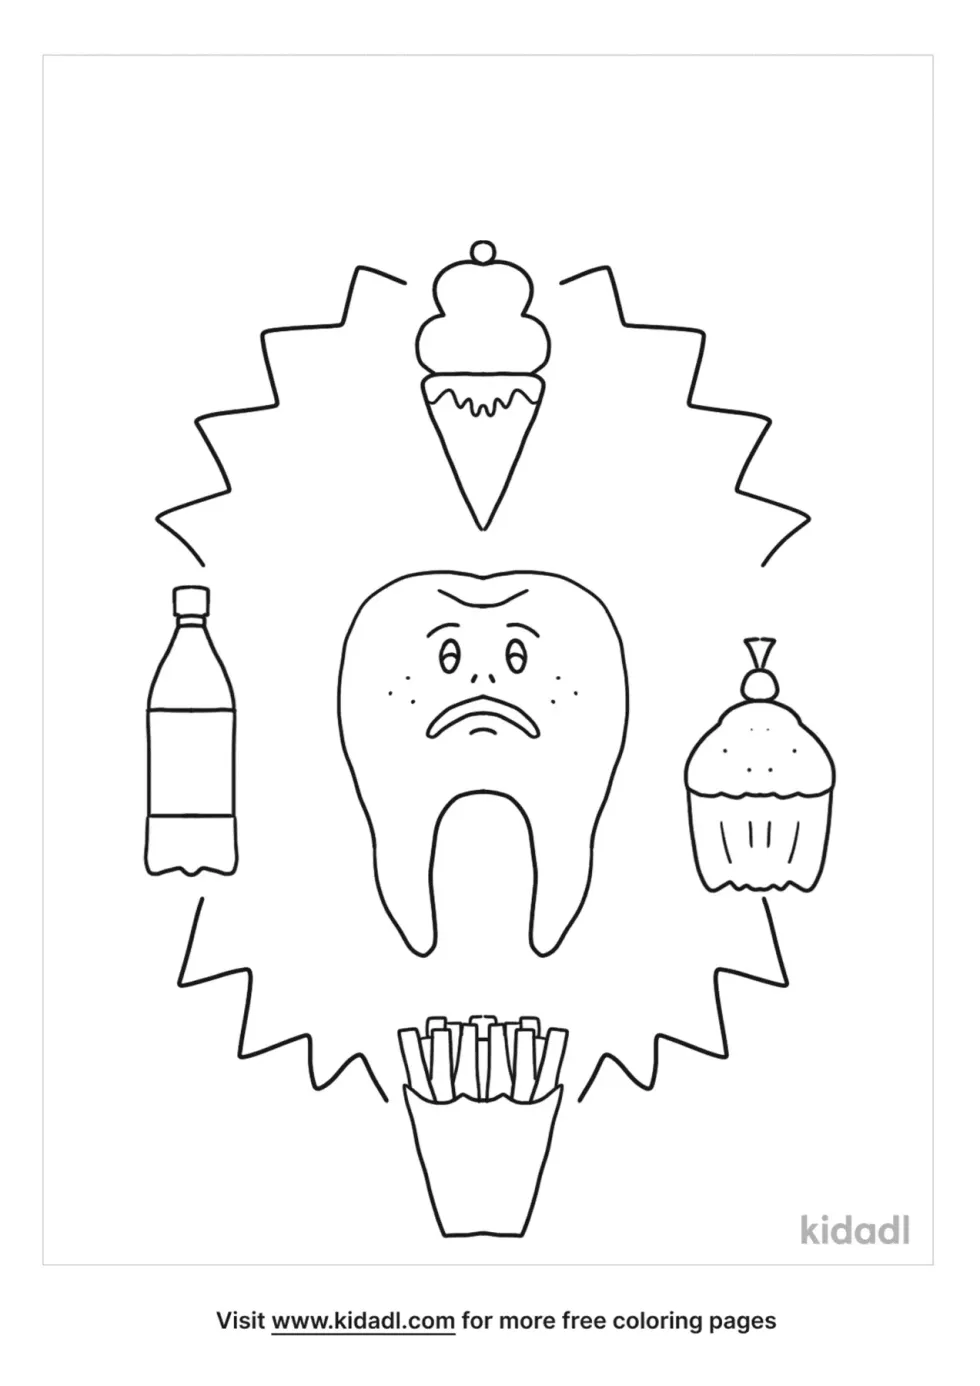 Bad Things For Your Teeth Coloring Page